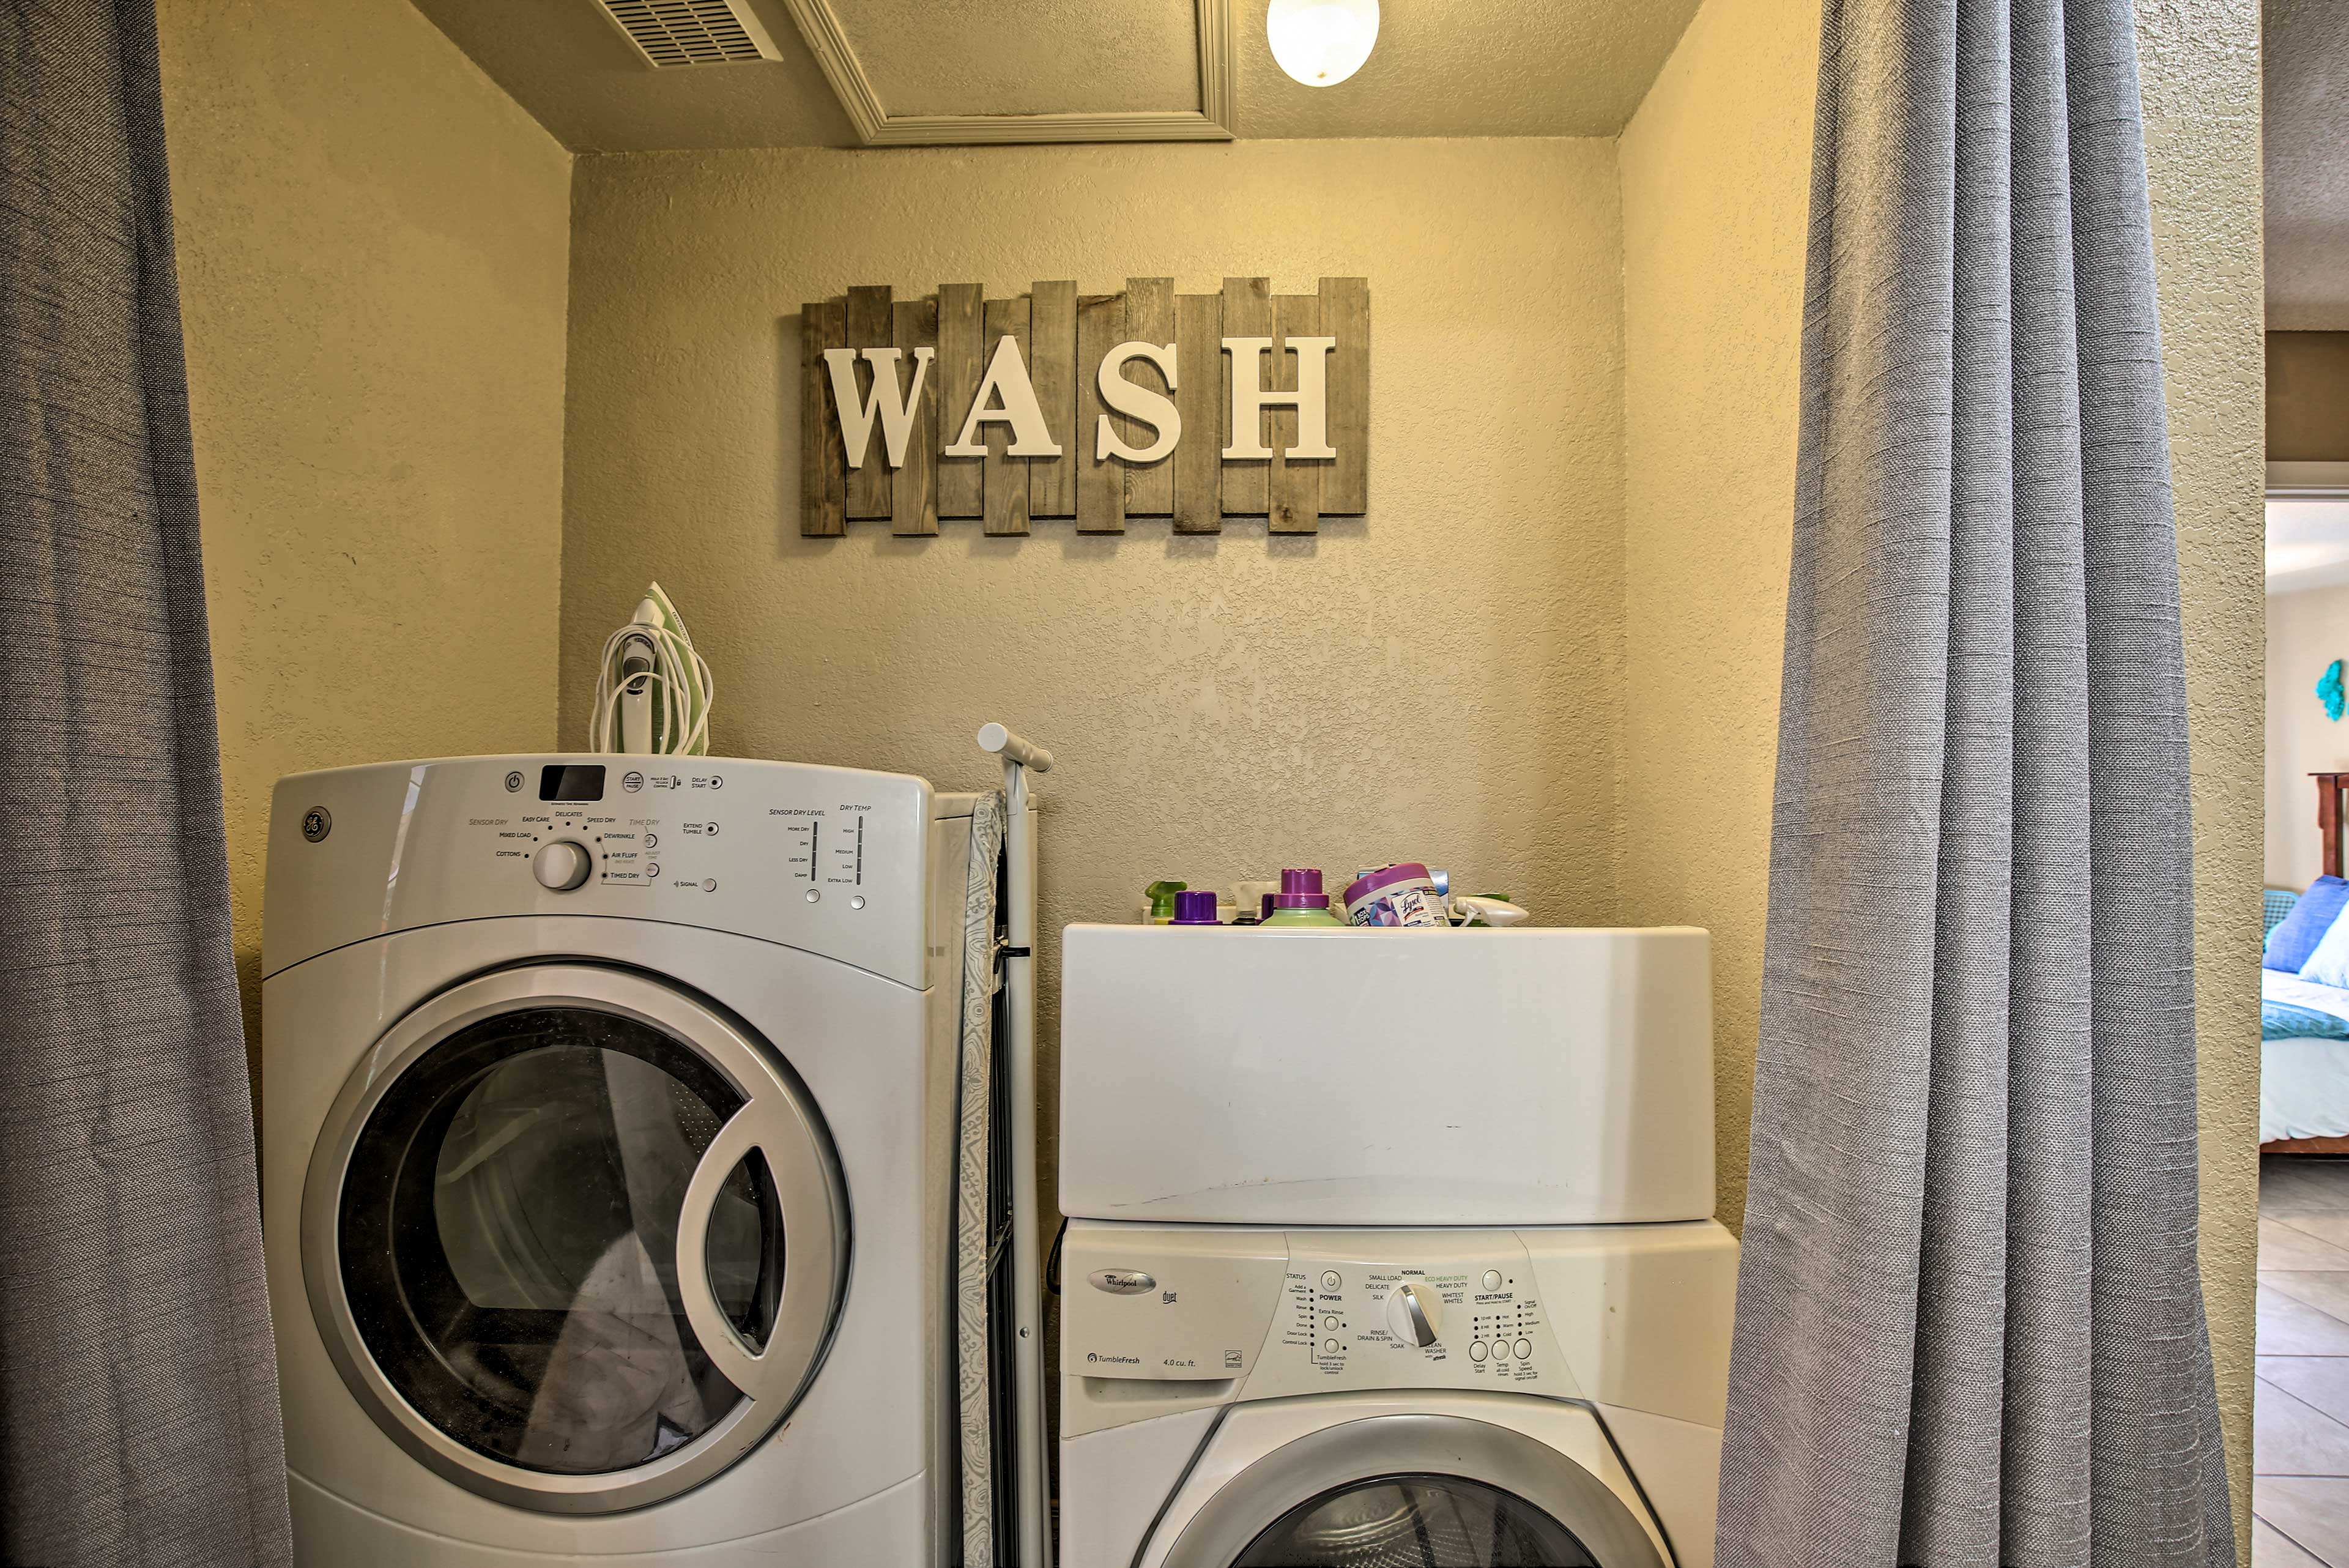 Use the washer and dryer to keep your clothes fresh and clean.